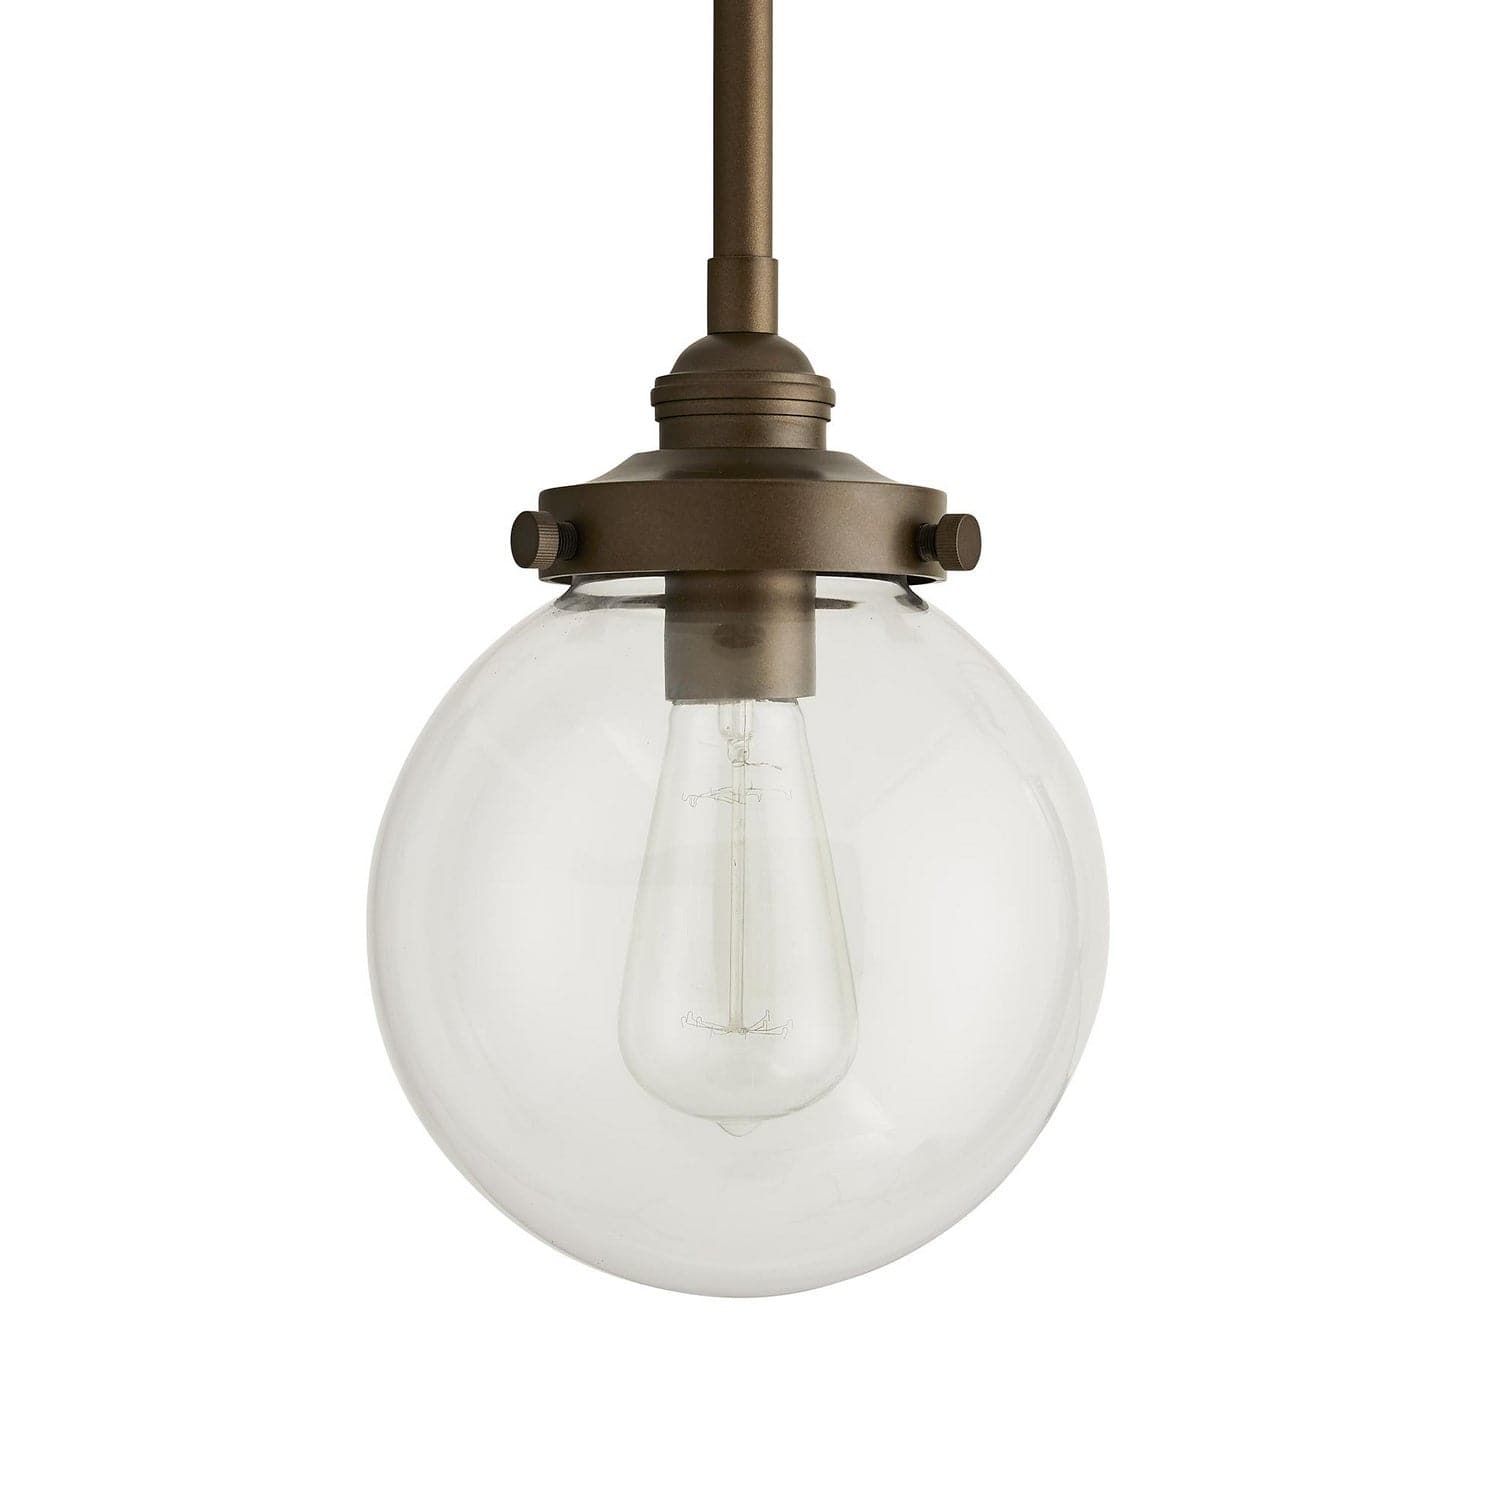 Arteriors - 49211 - One Light Outdoor Pendant - Reeves - Aged Brass